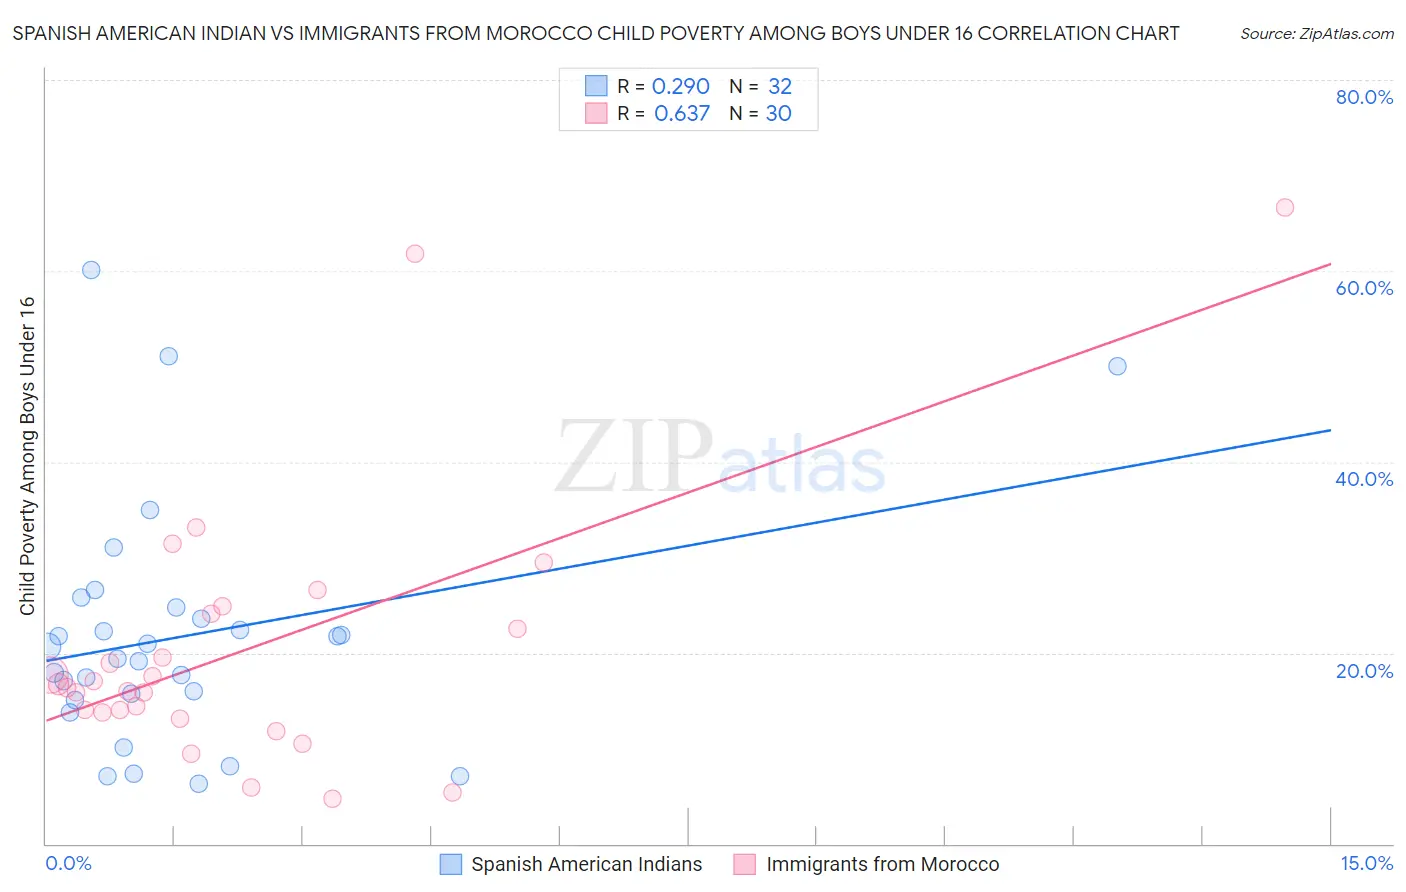 Spanish American Indian vs Immigrants from Morocco Child Poverty Among Boys Under 16